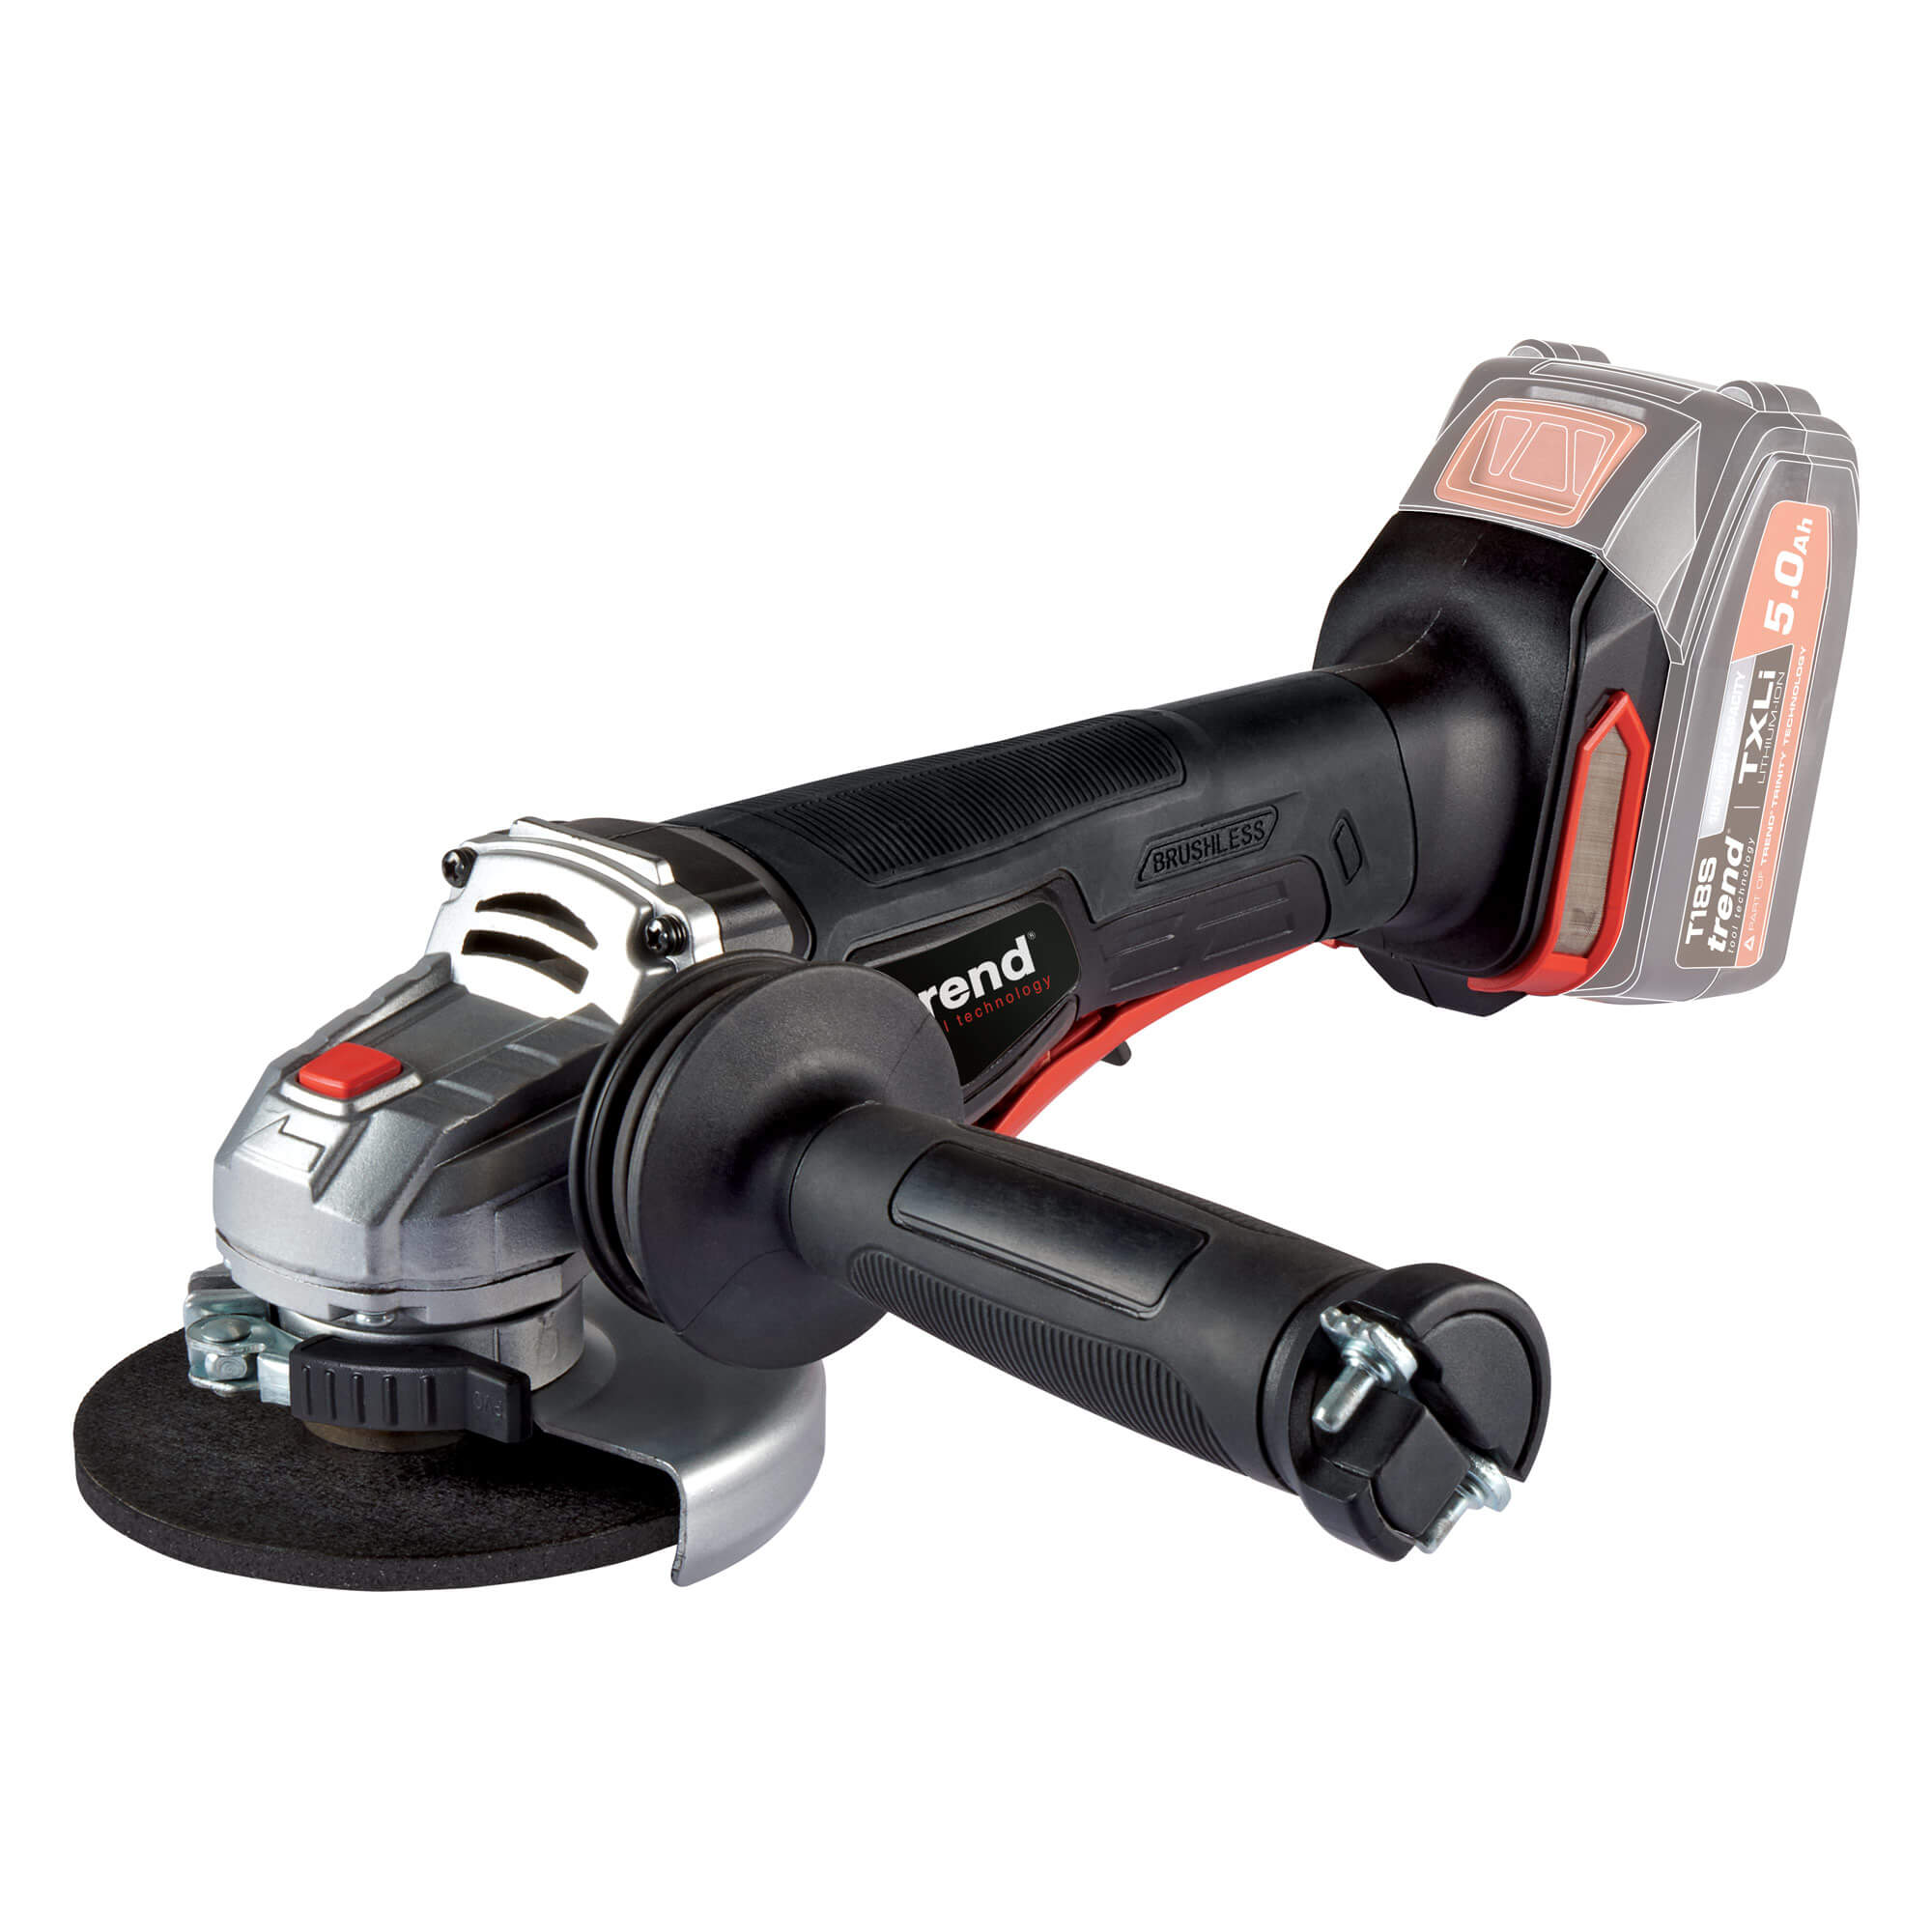 Photo of Trend T18s/ag115 18v Cordless Brushless Angle Grinder 115mm No Batteries No Charger No Case